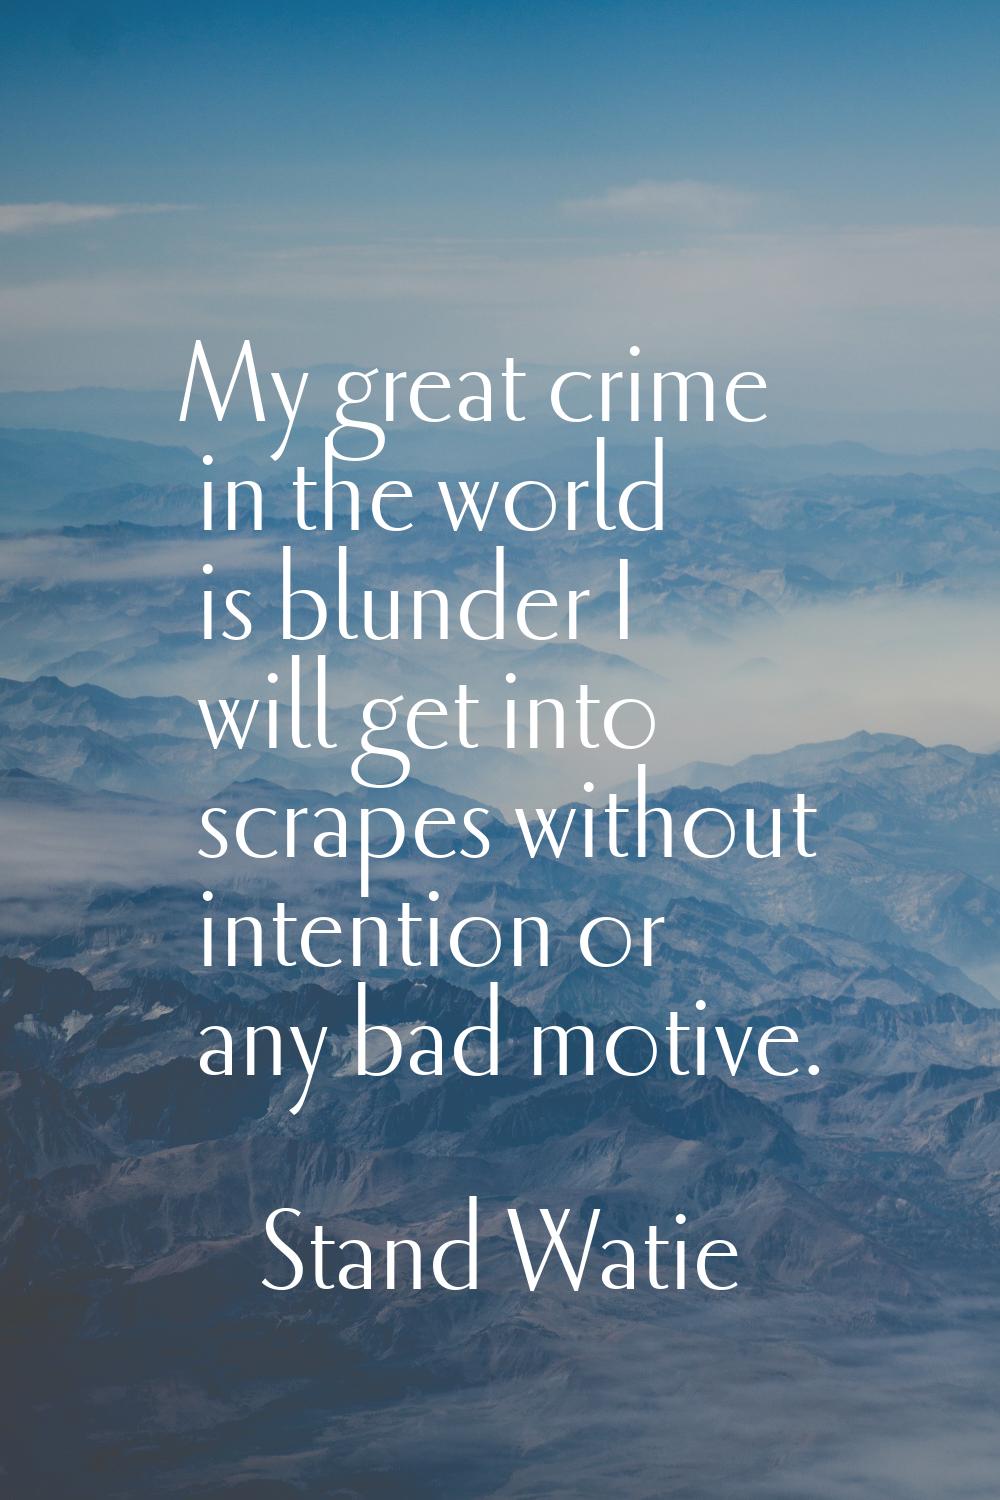 My great crime in the world is blunder I will get into scrapes without intention or any bad motive.